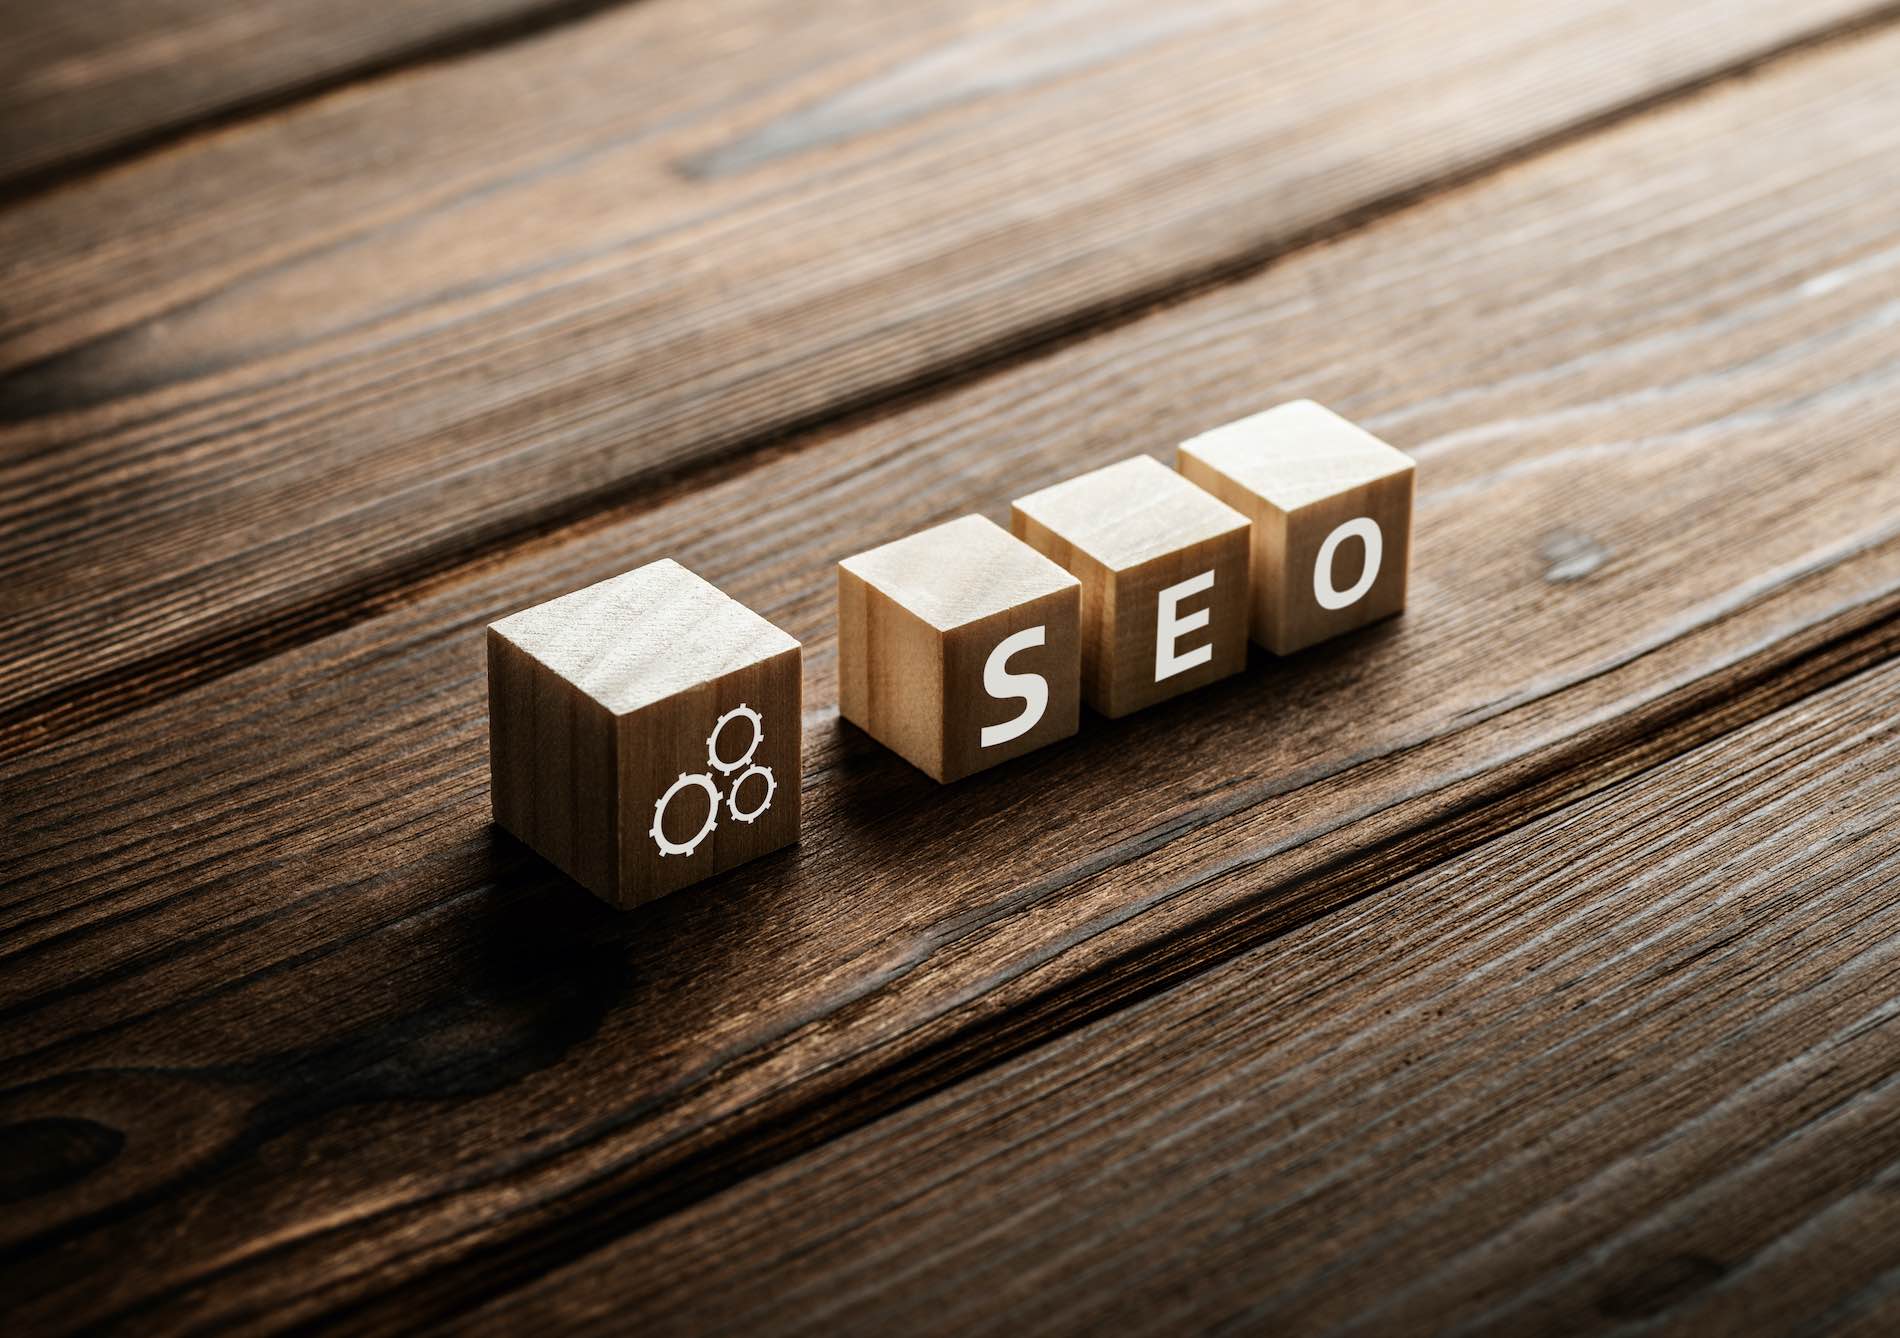 Small Wooden Blocks On A Wood Surface That Spell Out “Seo” For Search Engine Optimization And Seo Terms For Beginners